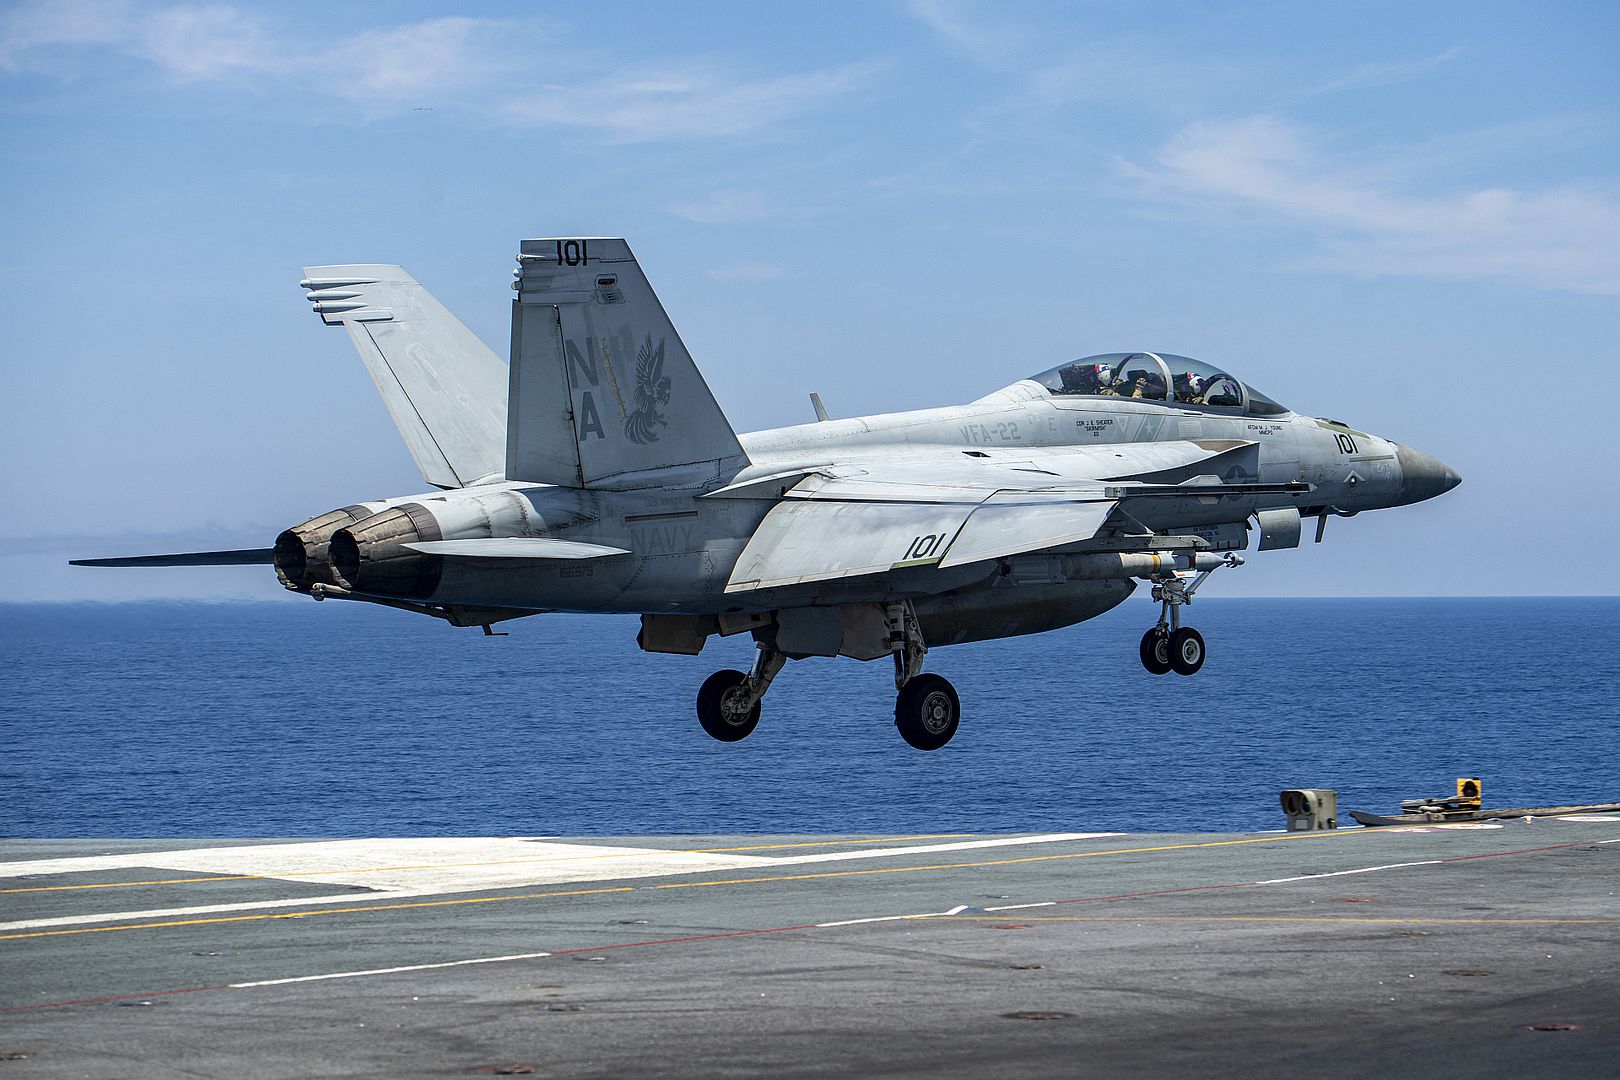  22 Launches From The Flight Deck Of The Aircraft Carrier USS Nimitz FiXQqb9DYWjq1DoqQDNCXB